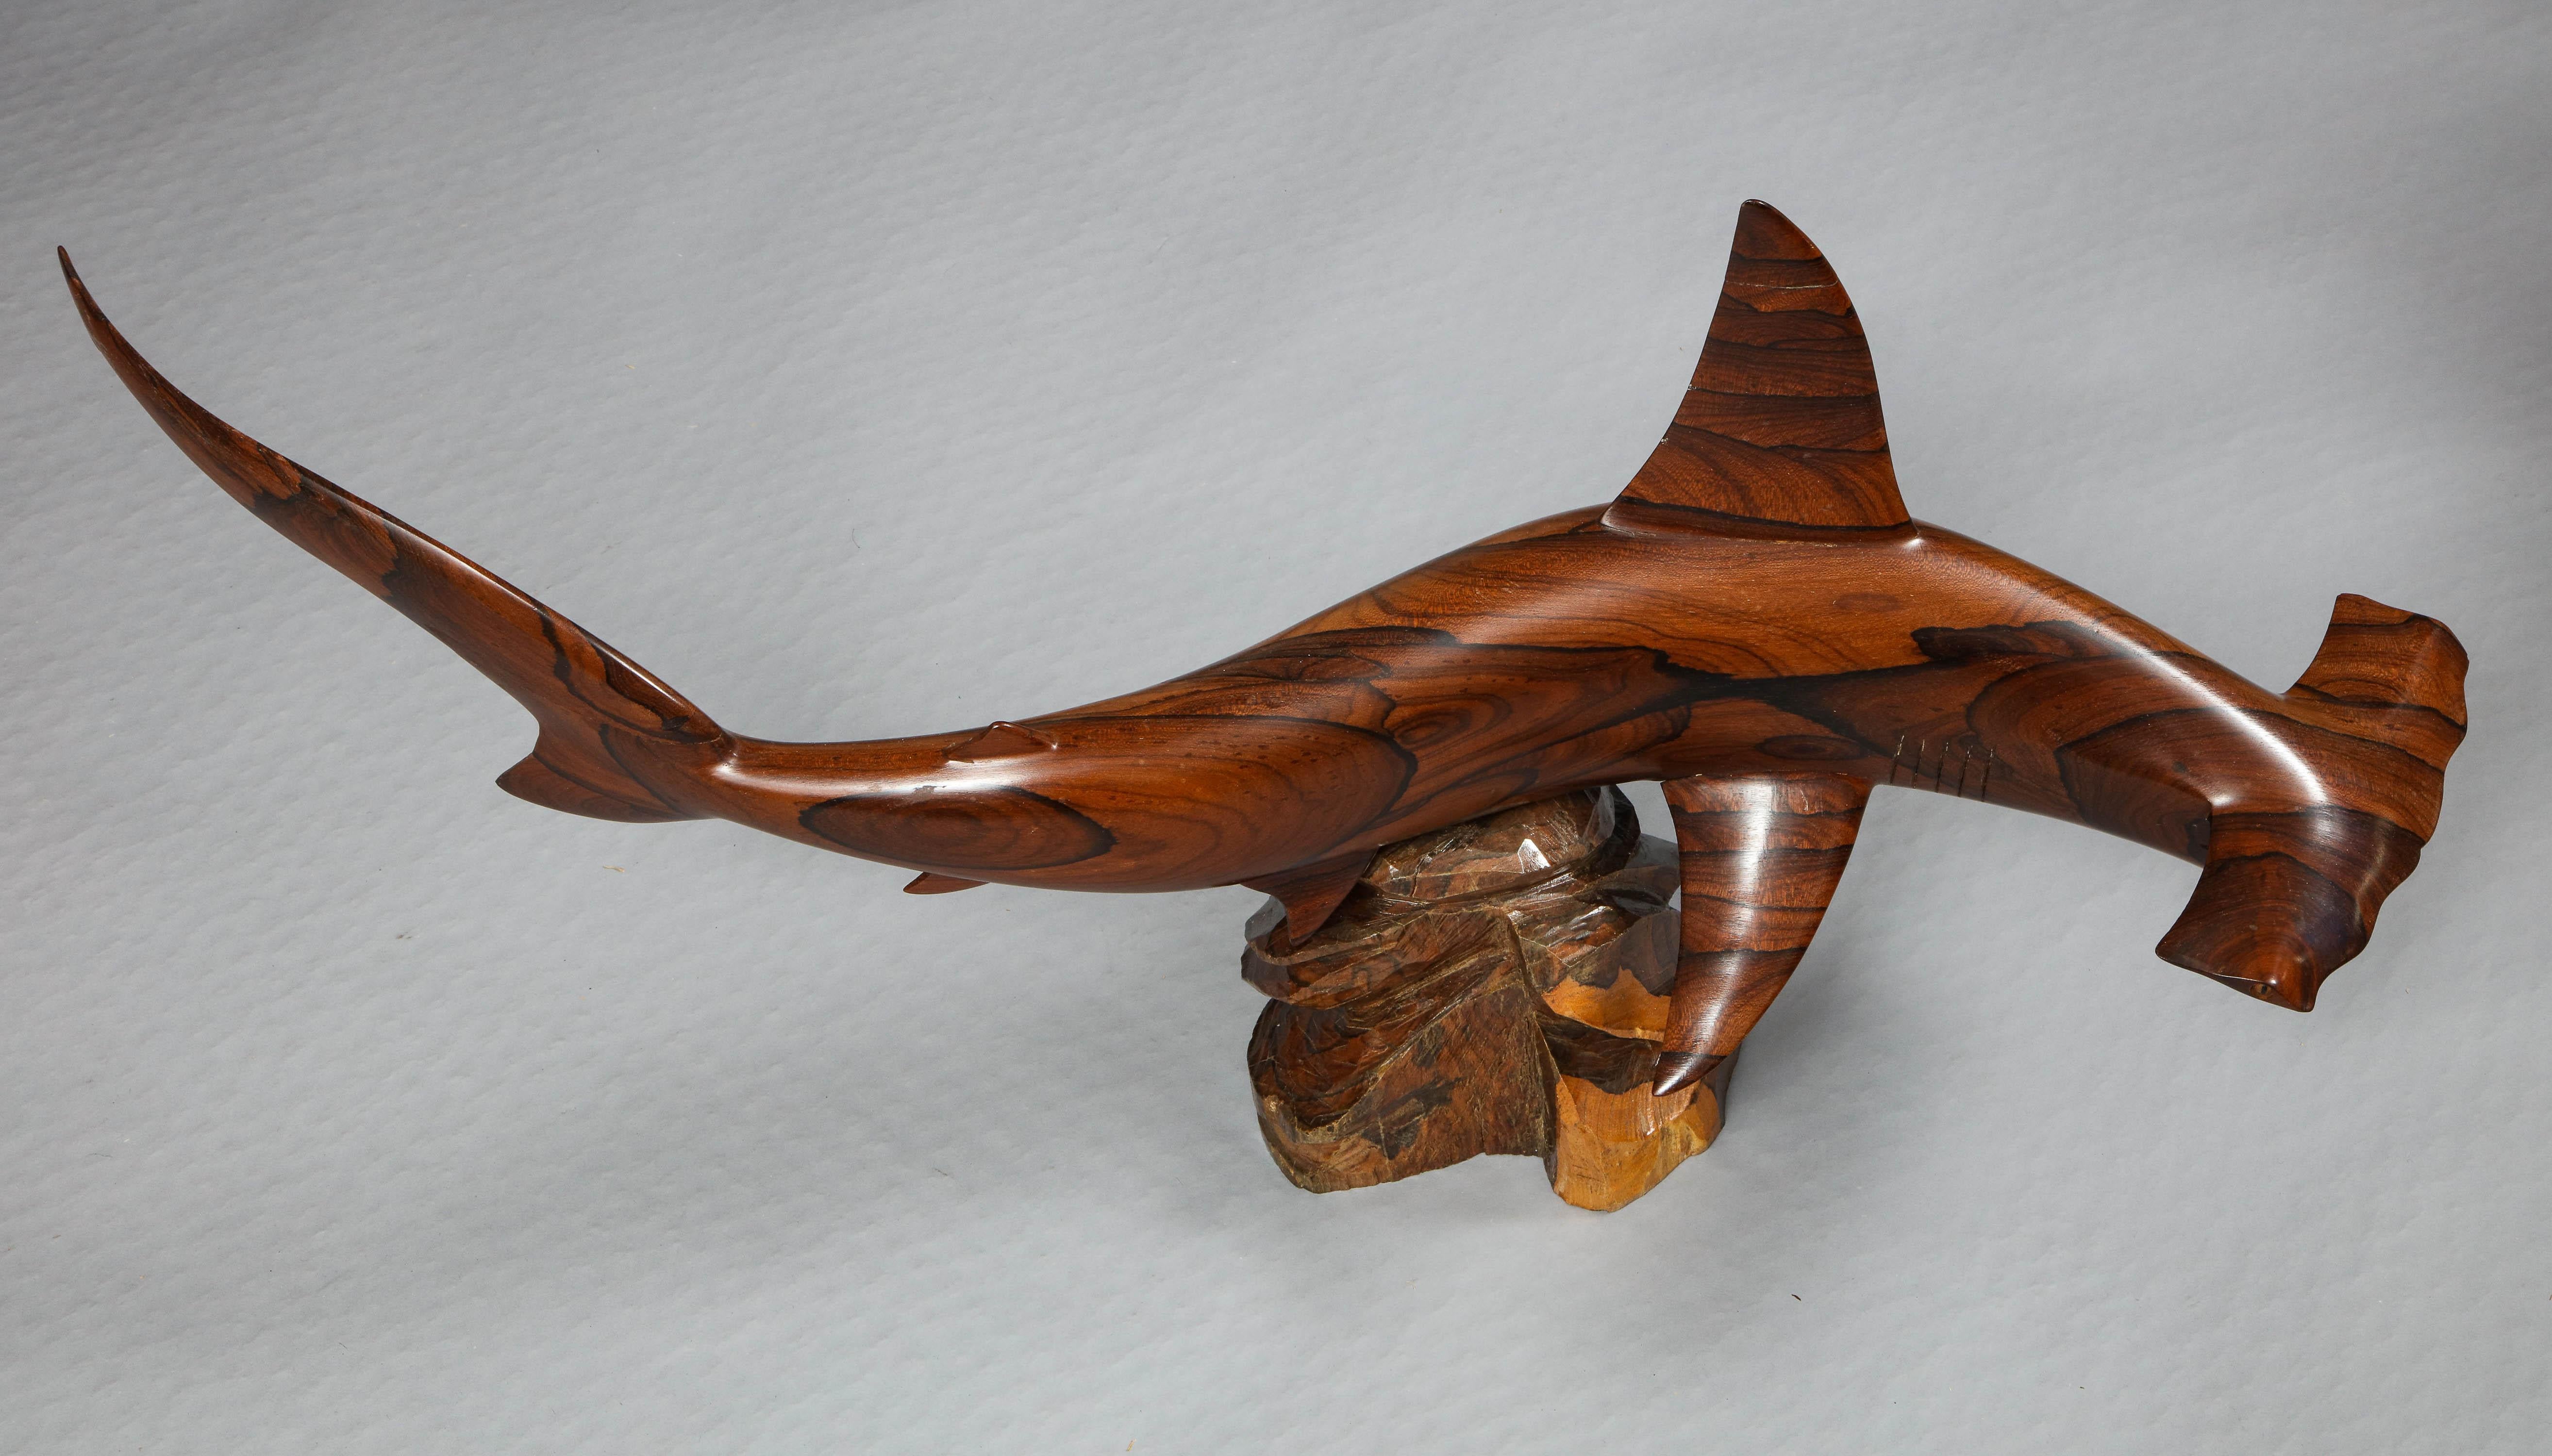 Very fine carved hammerhead shark executed in vividly grained exotic hardwood on naturalistic stand.